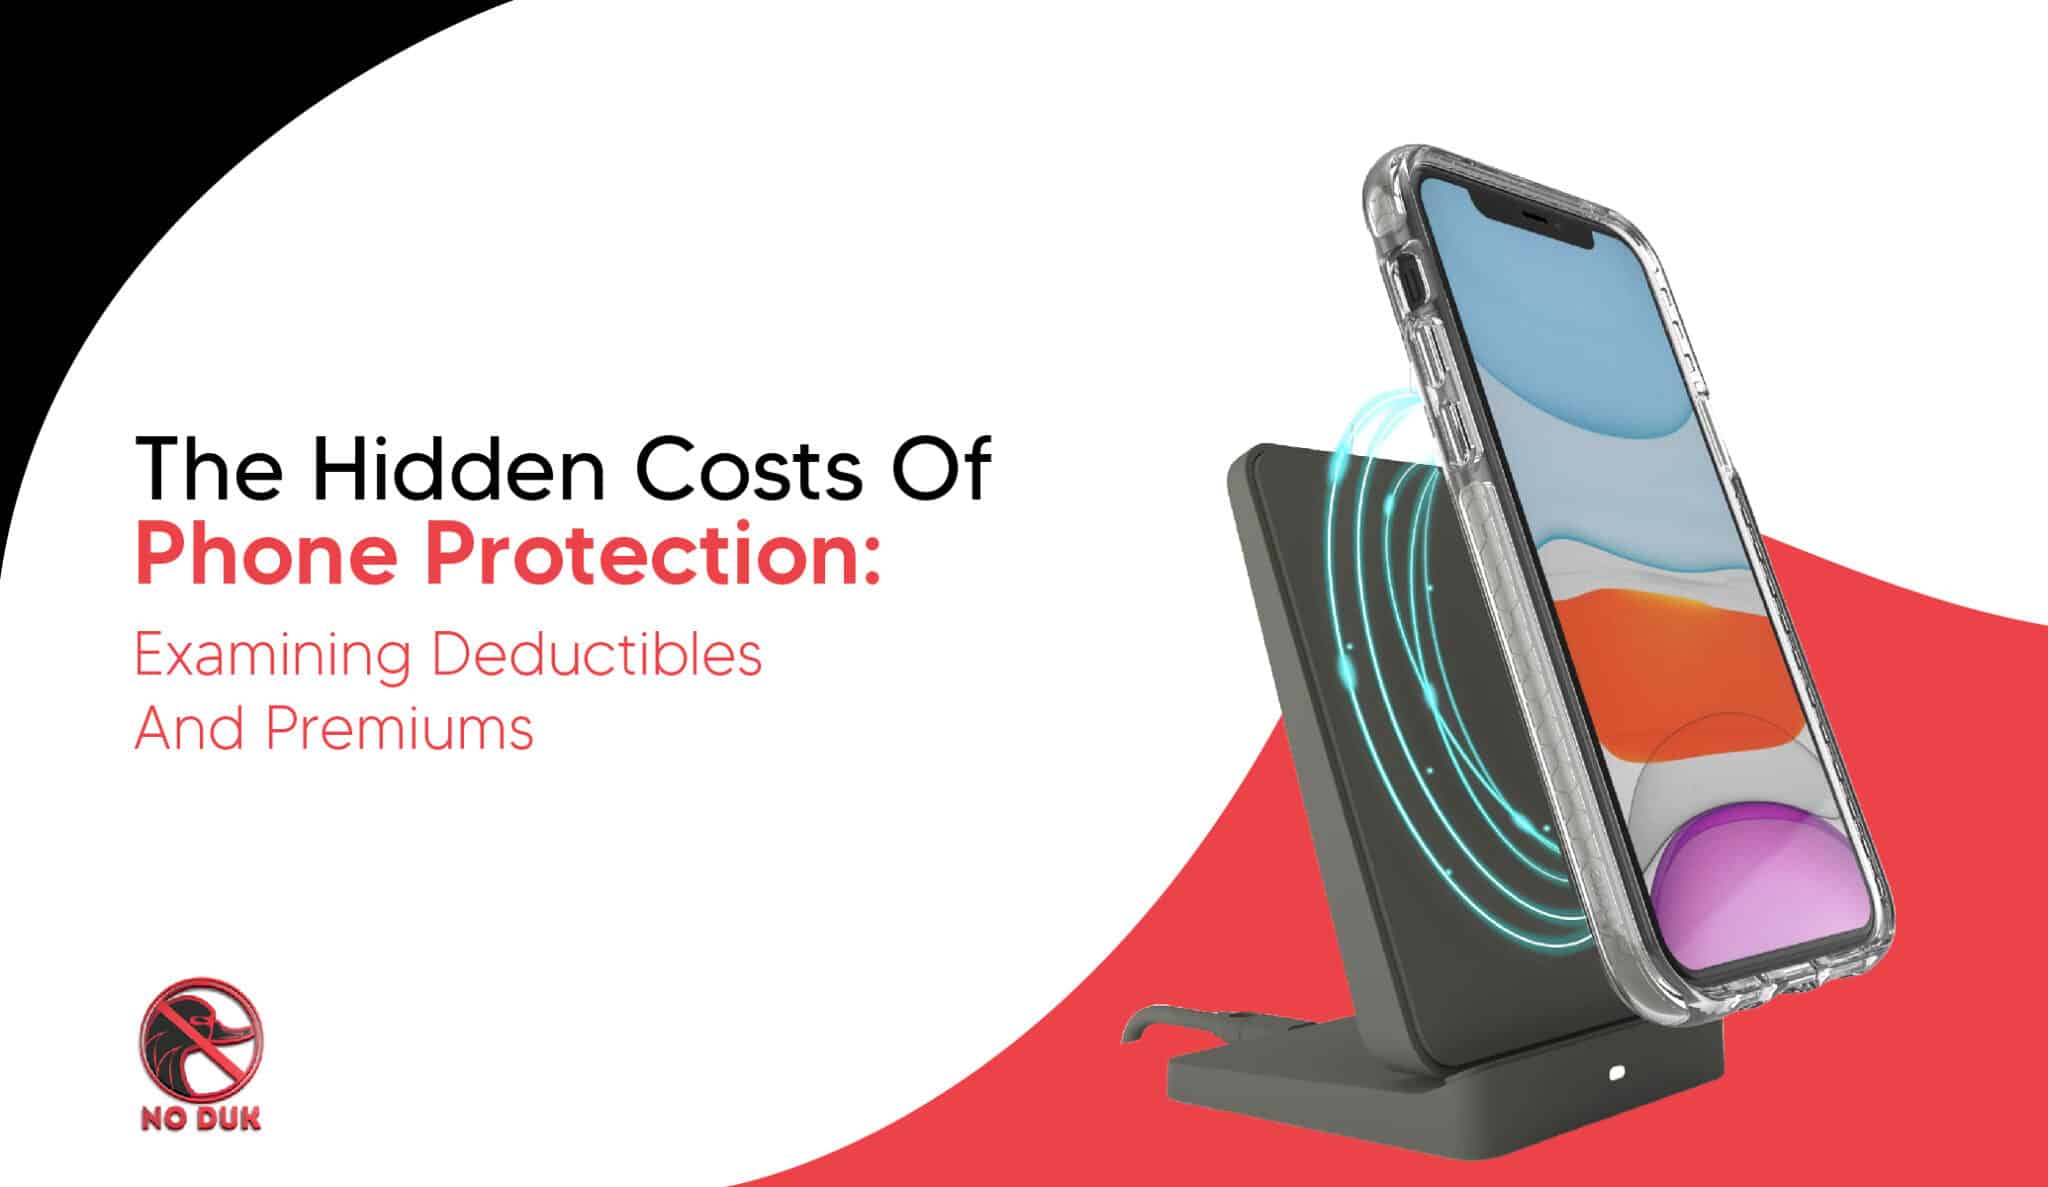 The Hidden Costs of Phone Protection: Examining Deductibles and Premiums